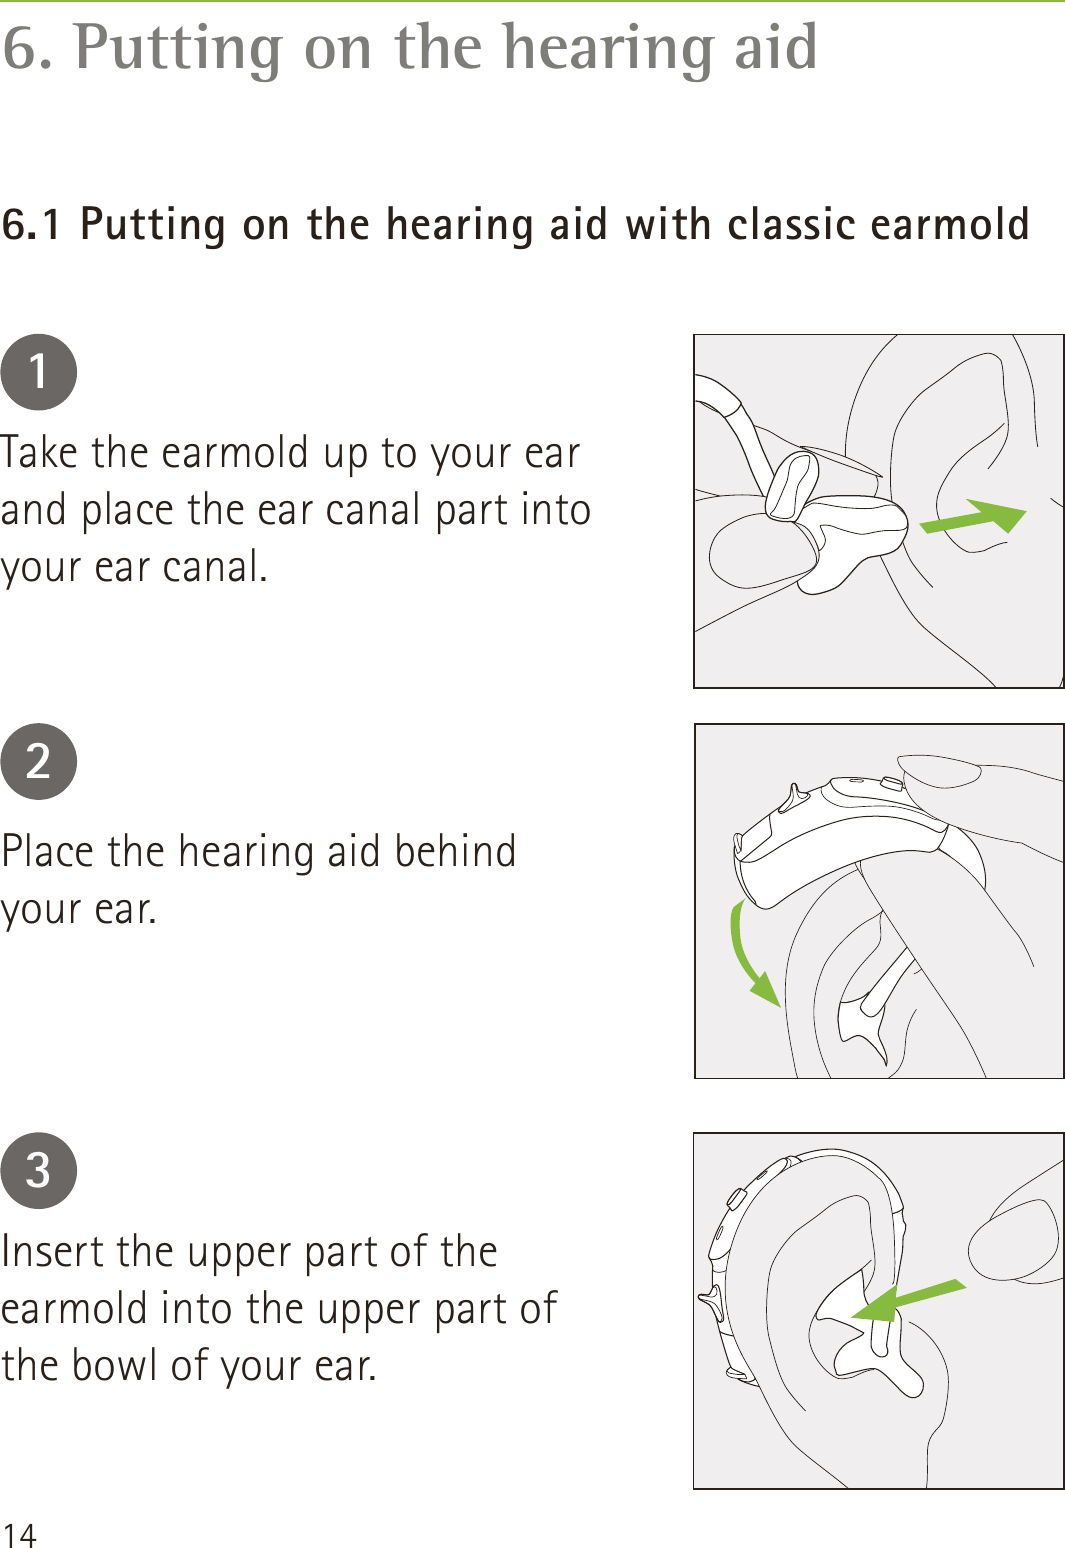 146. Putting on the hearing aid6.1 Putting on the hearing aid with classic earmold123Take the earmold up to your ear and place the ear canal part into your ear canal.Place the hearing aid behind your ear.Insert the upper part of the earmold into the upper part of the bowl of your ear.